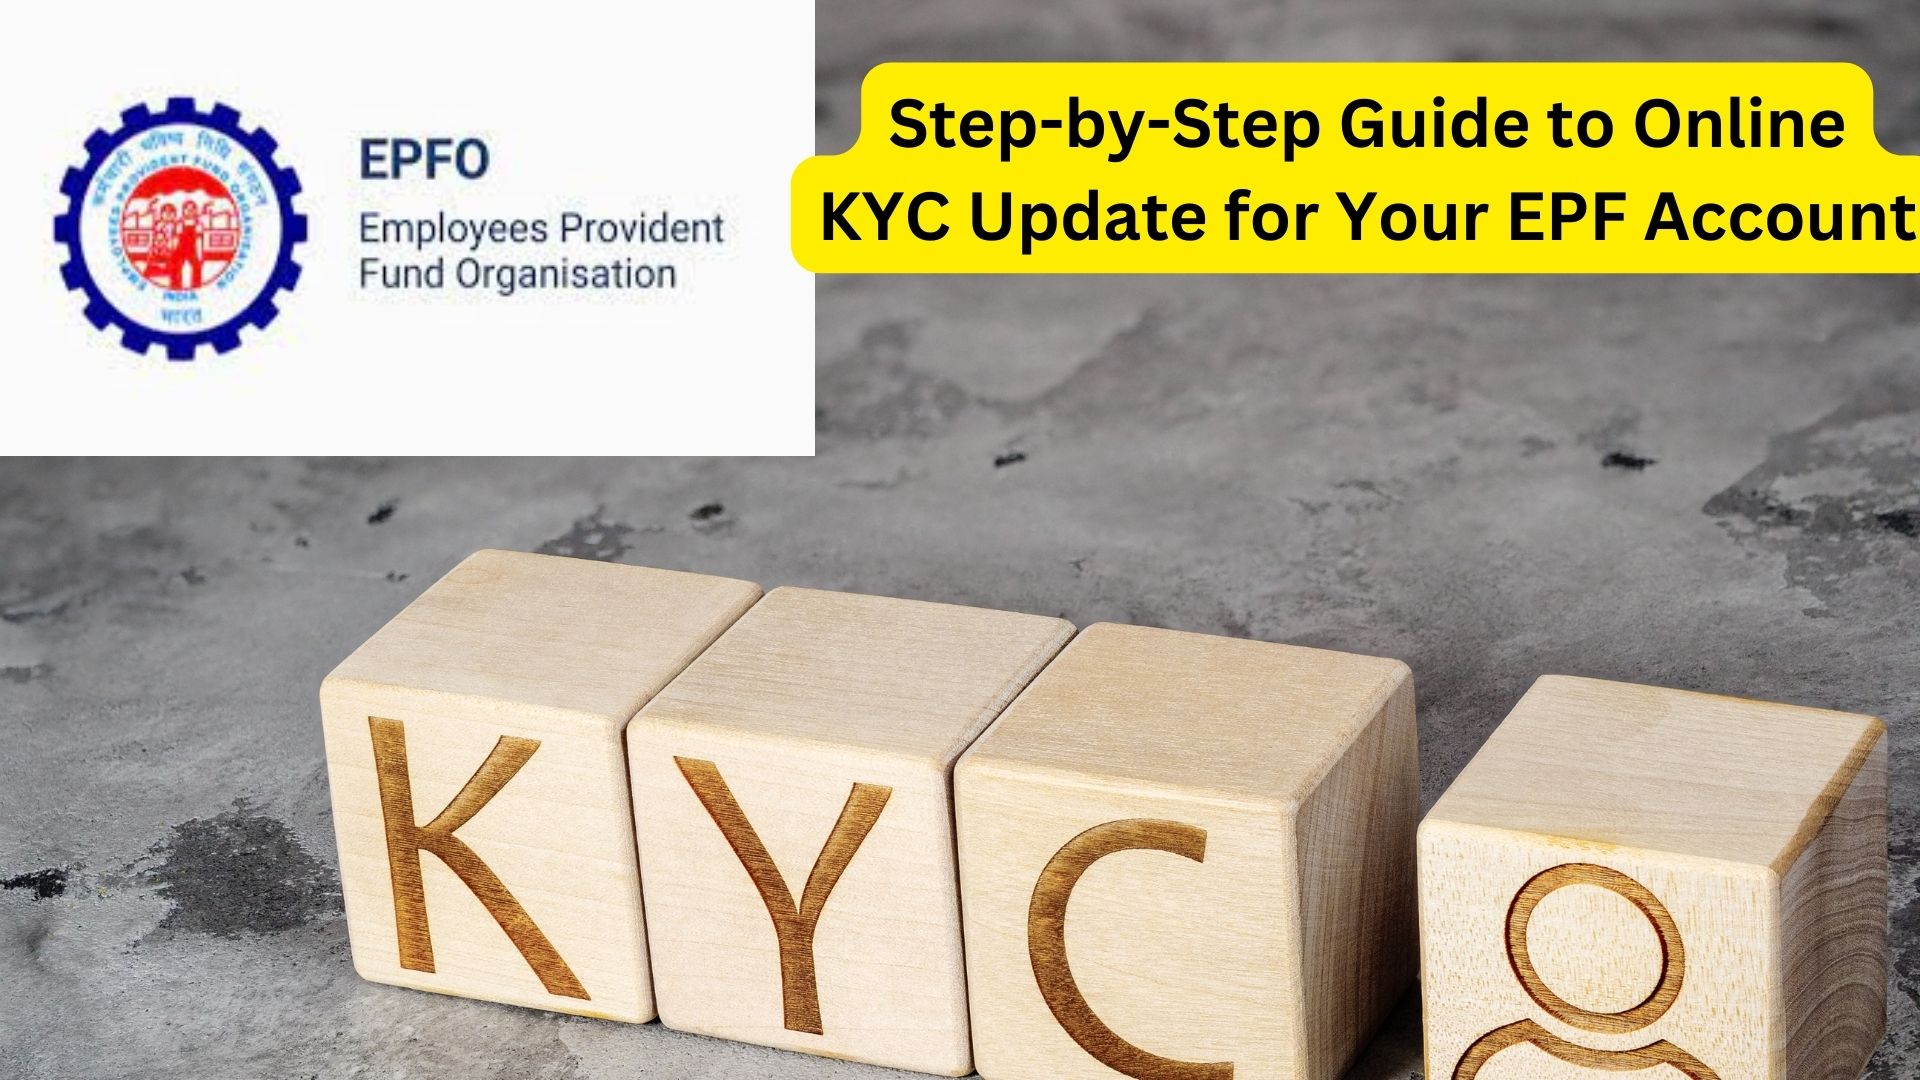 Step-by-Step Guide to Online KYC Update for Your EPF Account